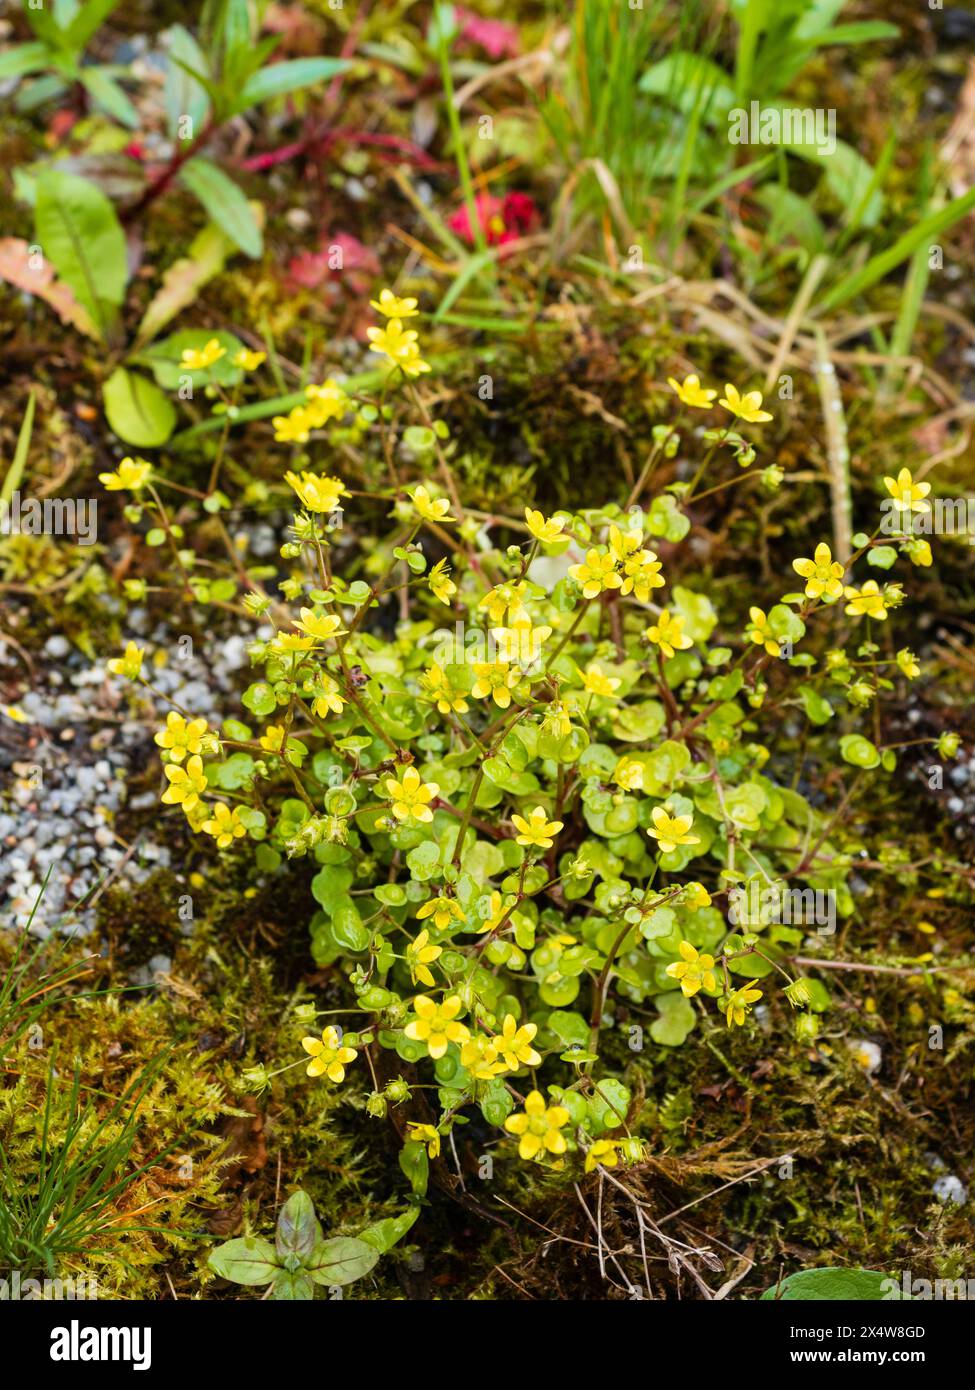 Yellow flowers of the spring blooming celandine saxifrage, Saxifraga cymbalaria, a low growing annual Stock Photo